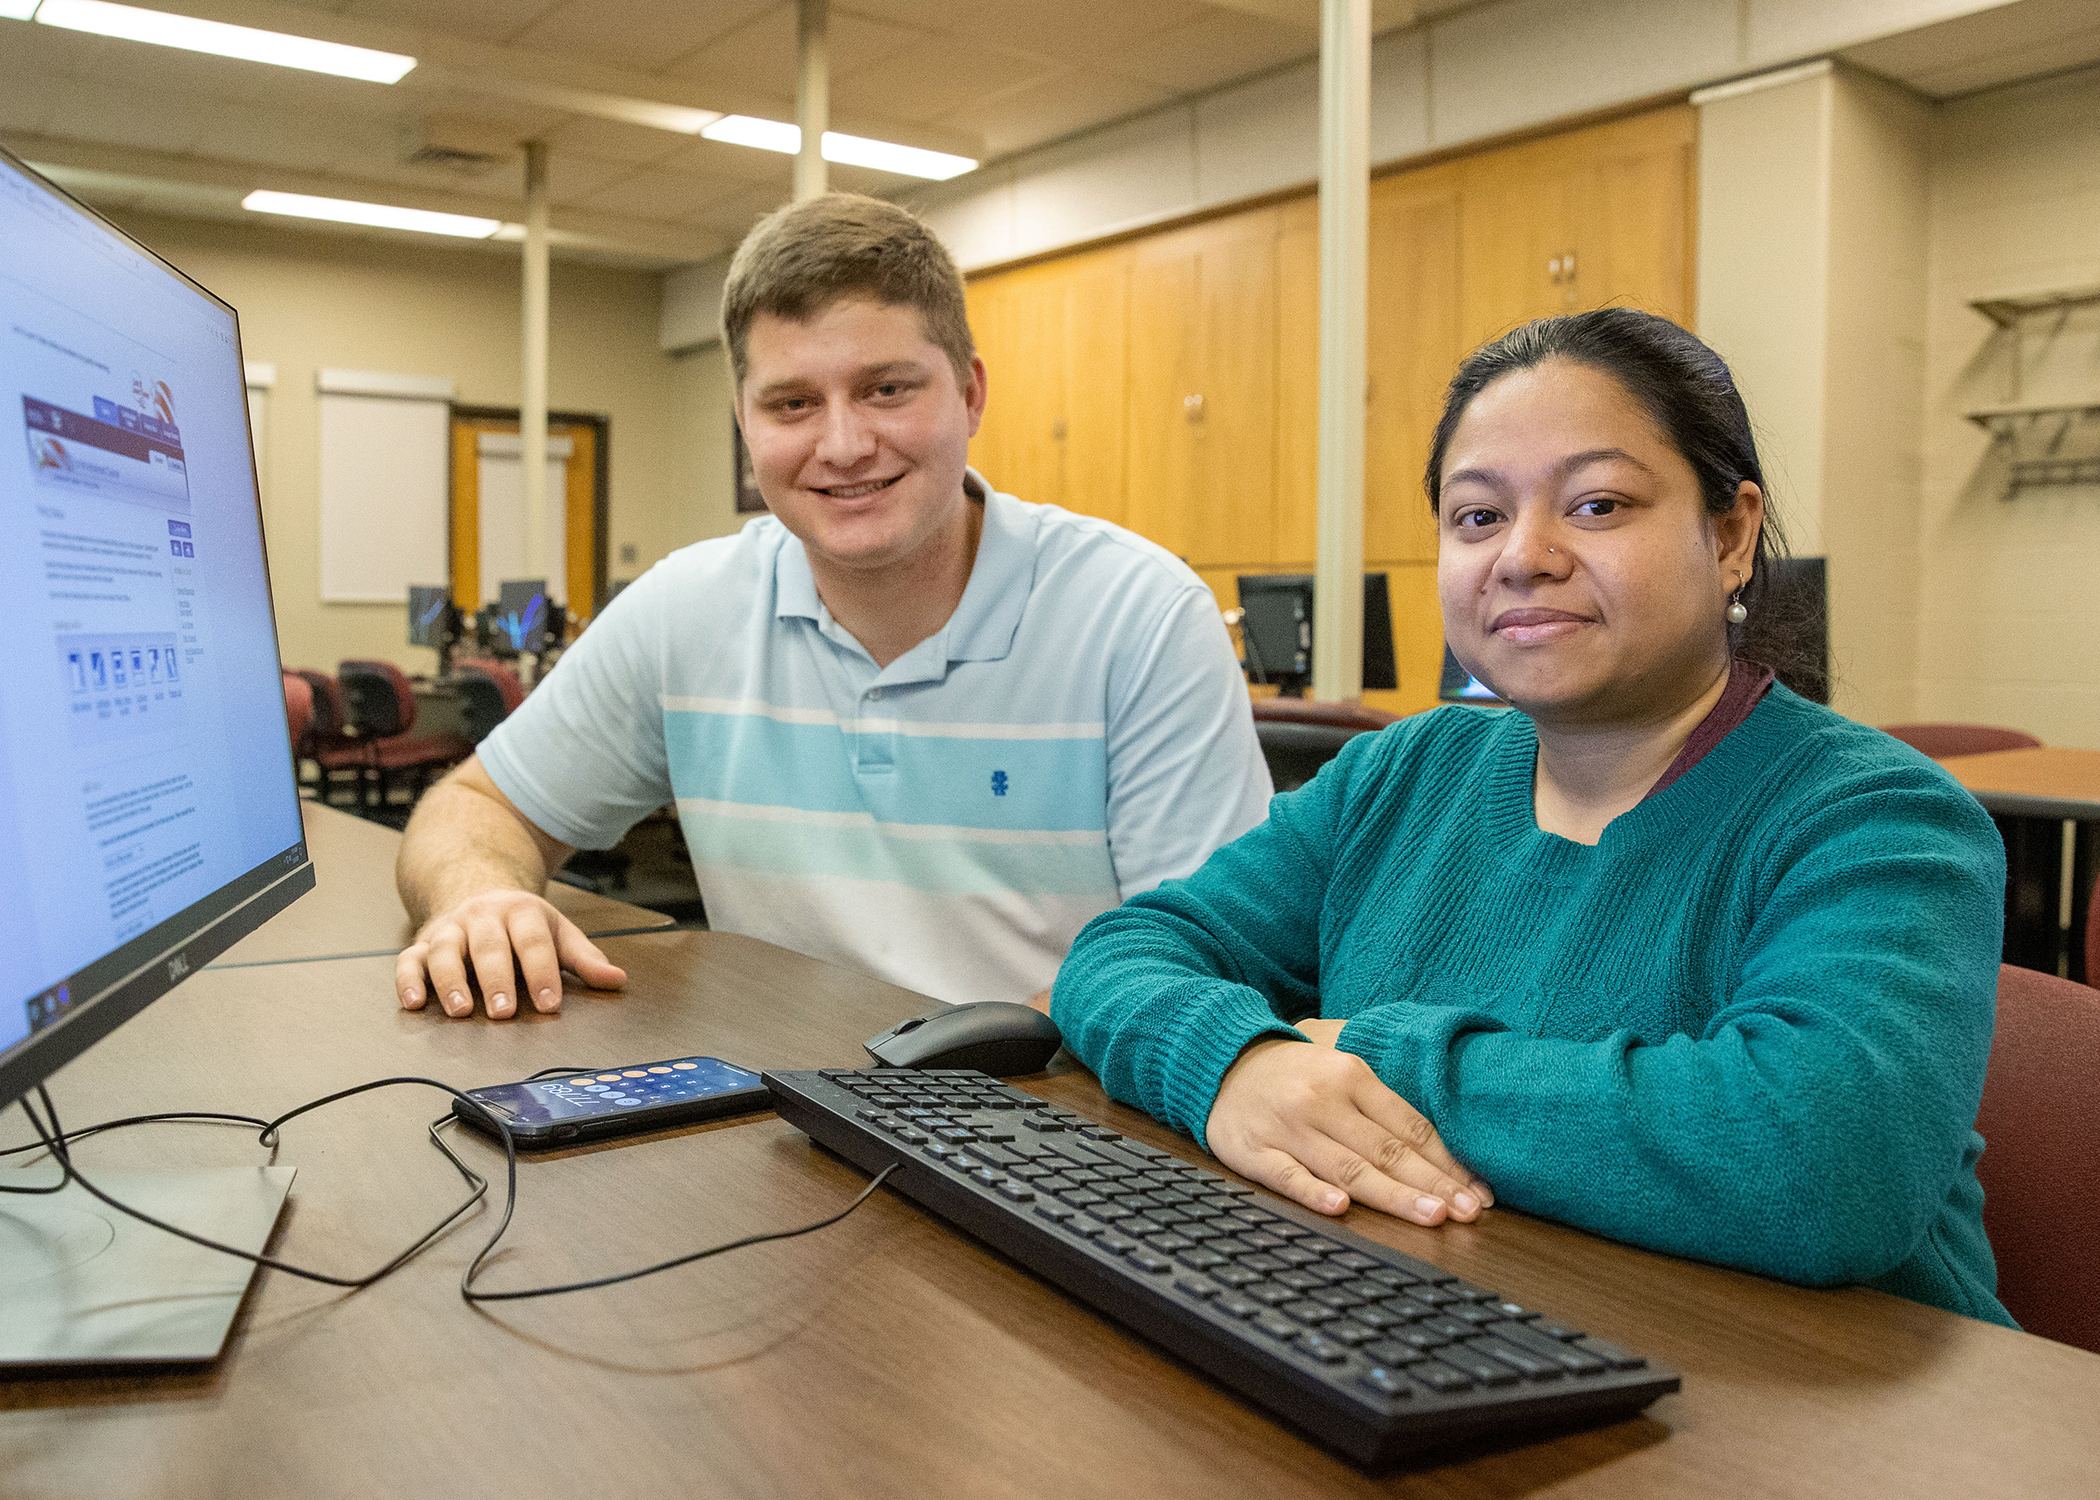 two students smiling with IRS forms on the desk in front of them